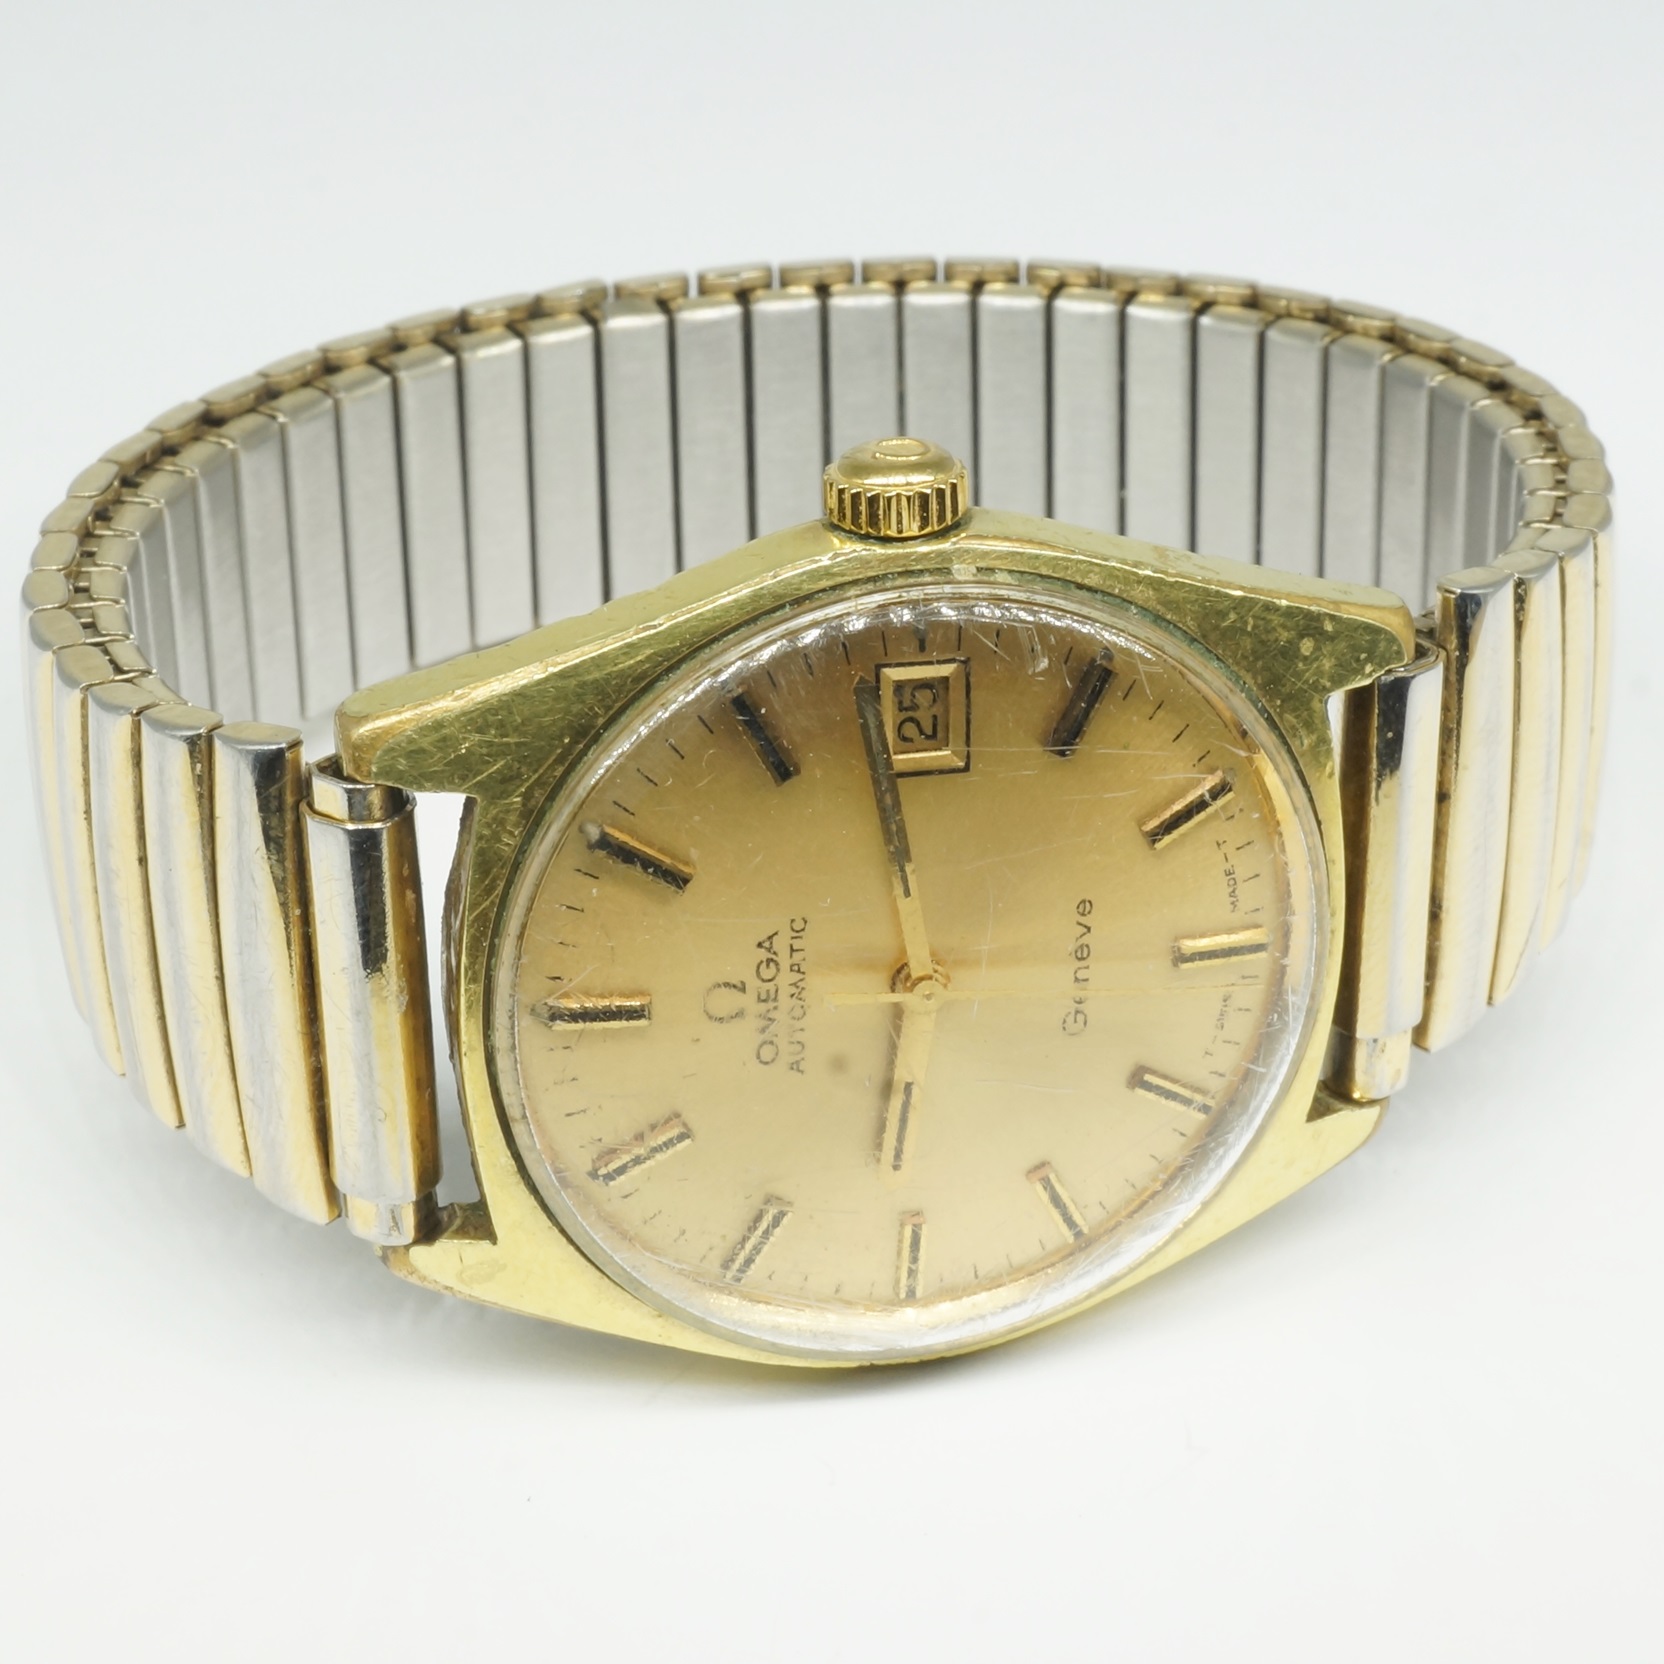 'Gentlemans Omega Automatic Wrist Watch With Gold Plated Stainless Steel Back'